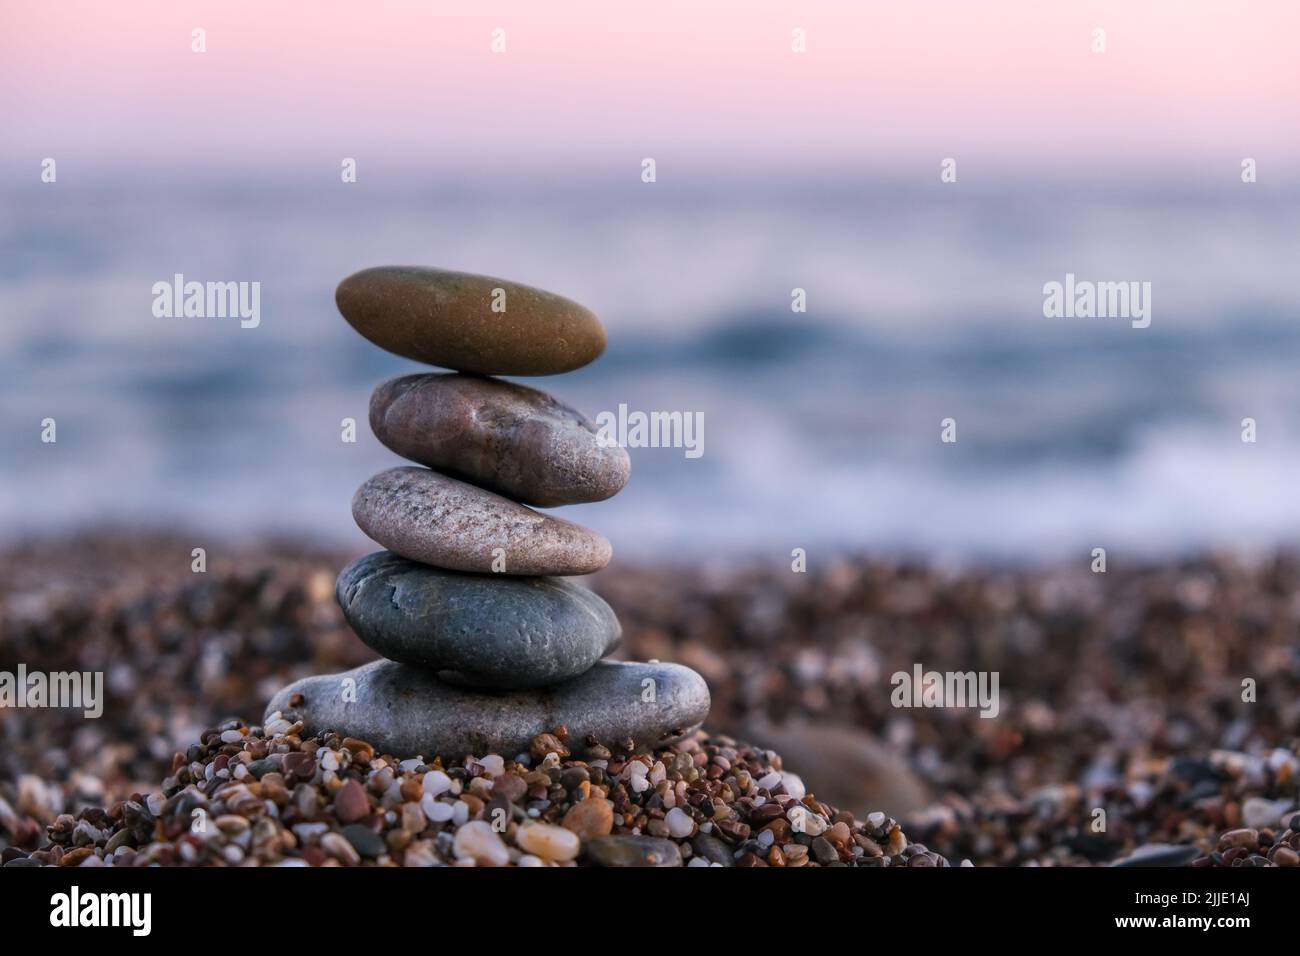 Pyramid of pebbles on the beach at sunset. Concept of zen, stability, harmony, balance and meditation, copy space. Stock Photo